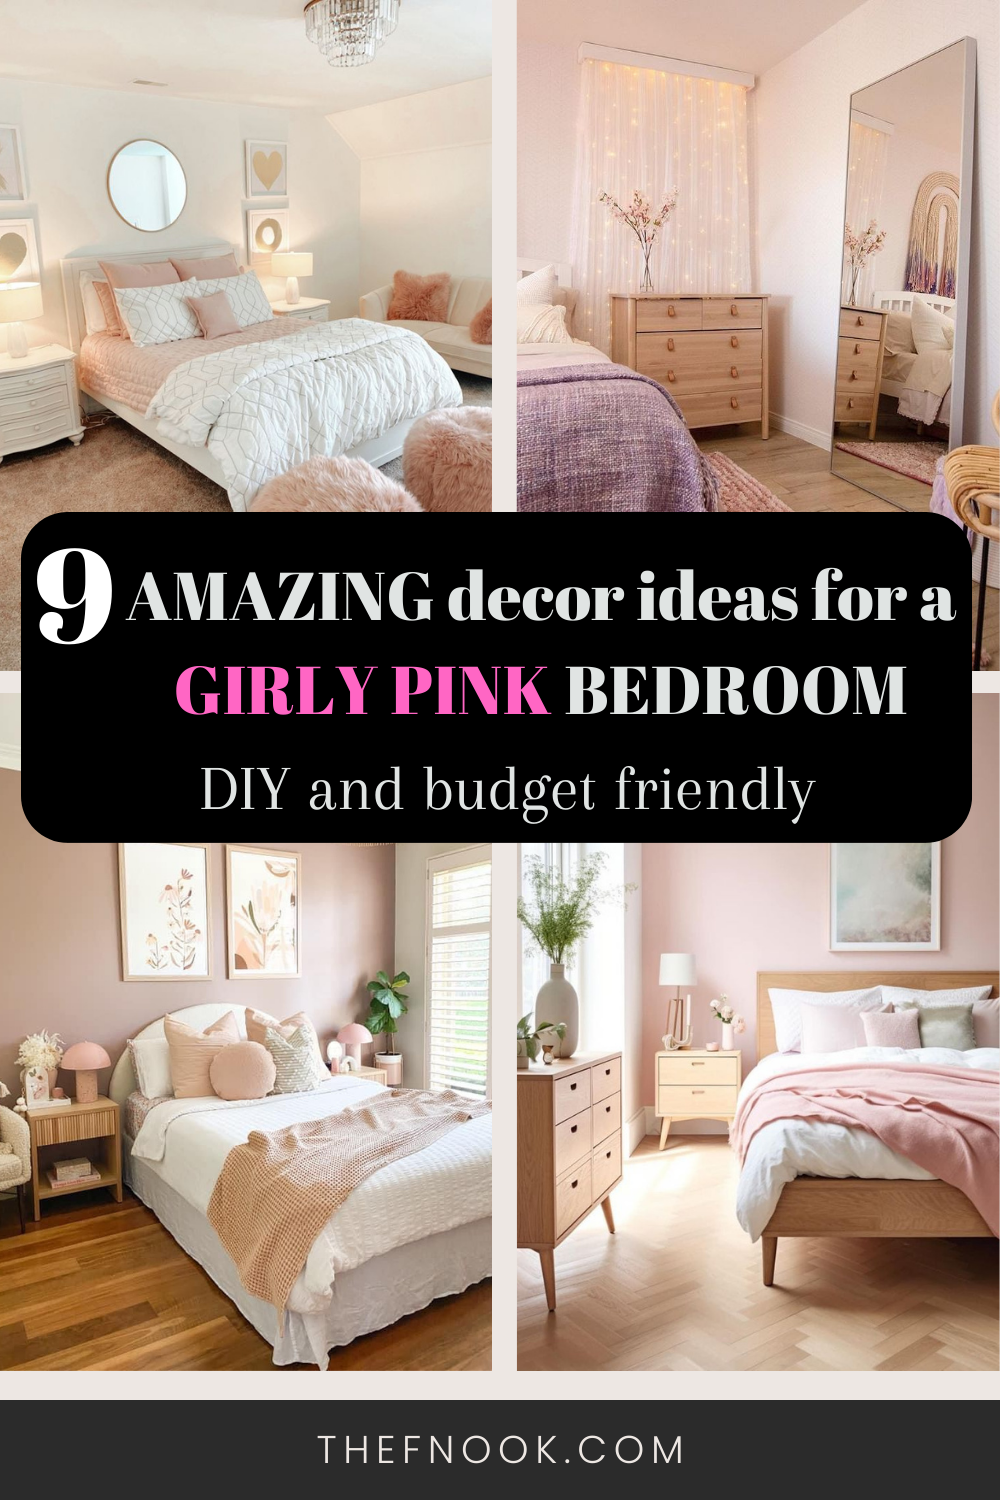 9 Amazing Decor Ideas for a Girly Pink Bedroom